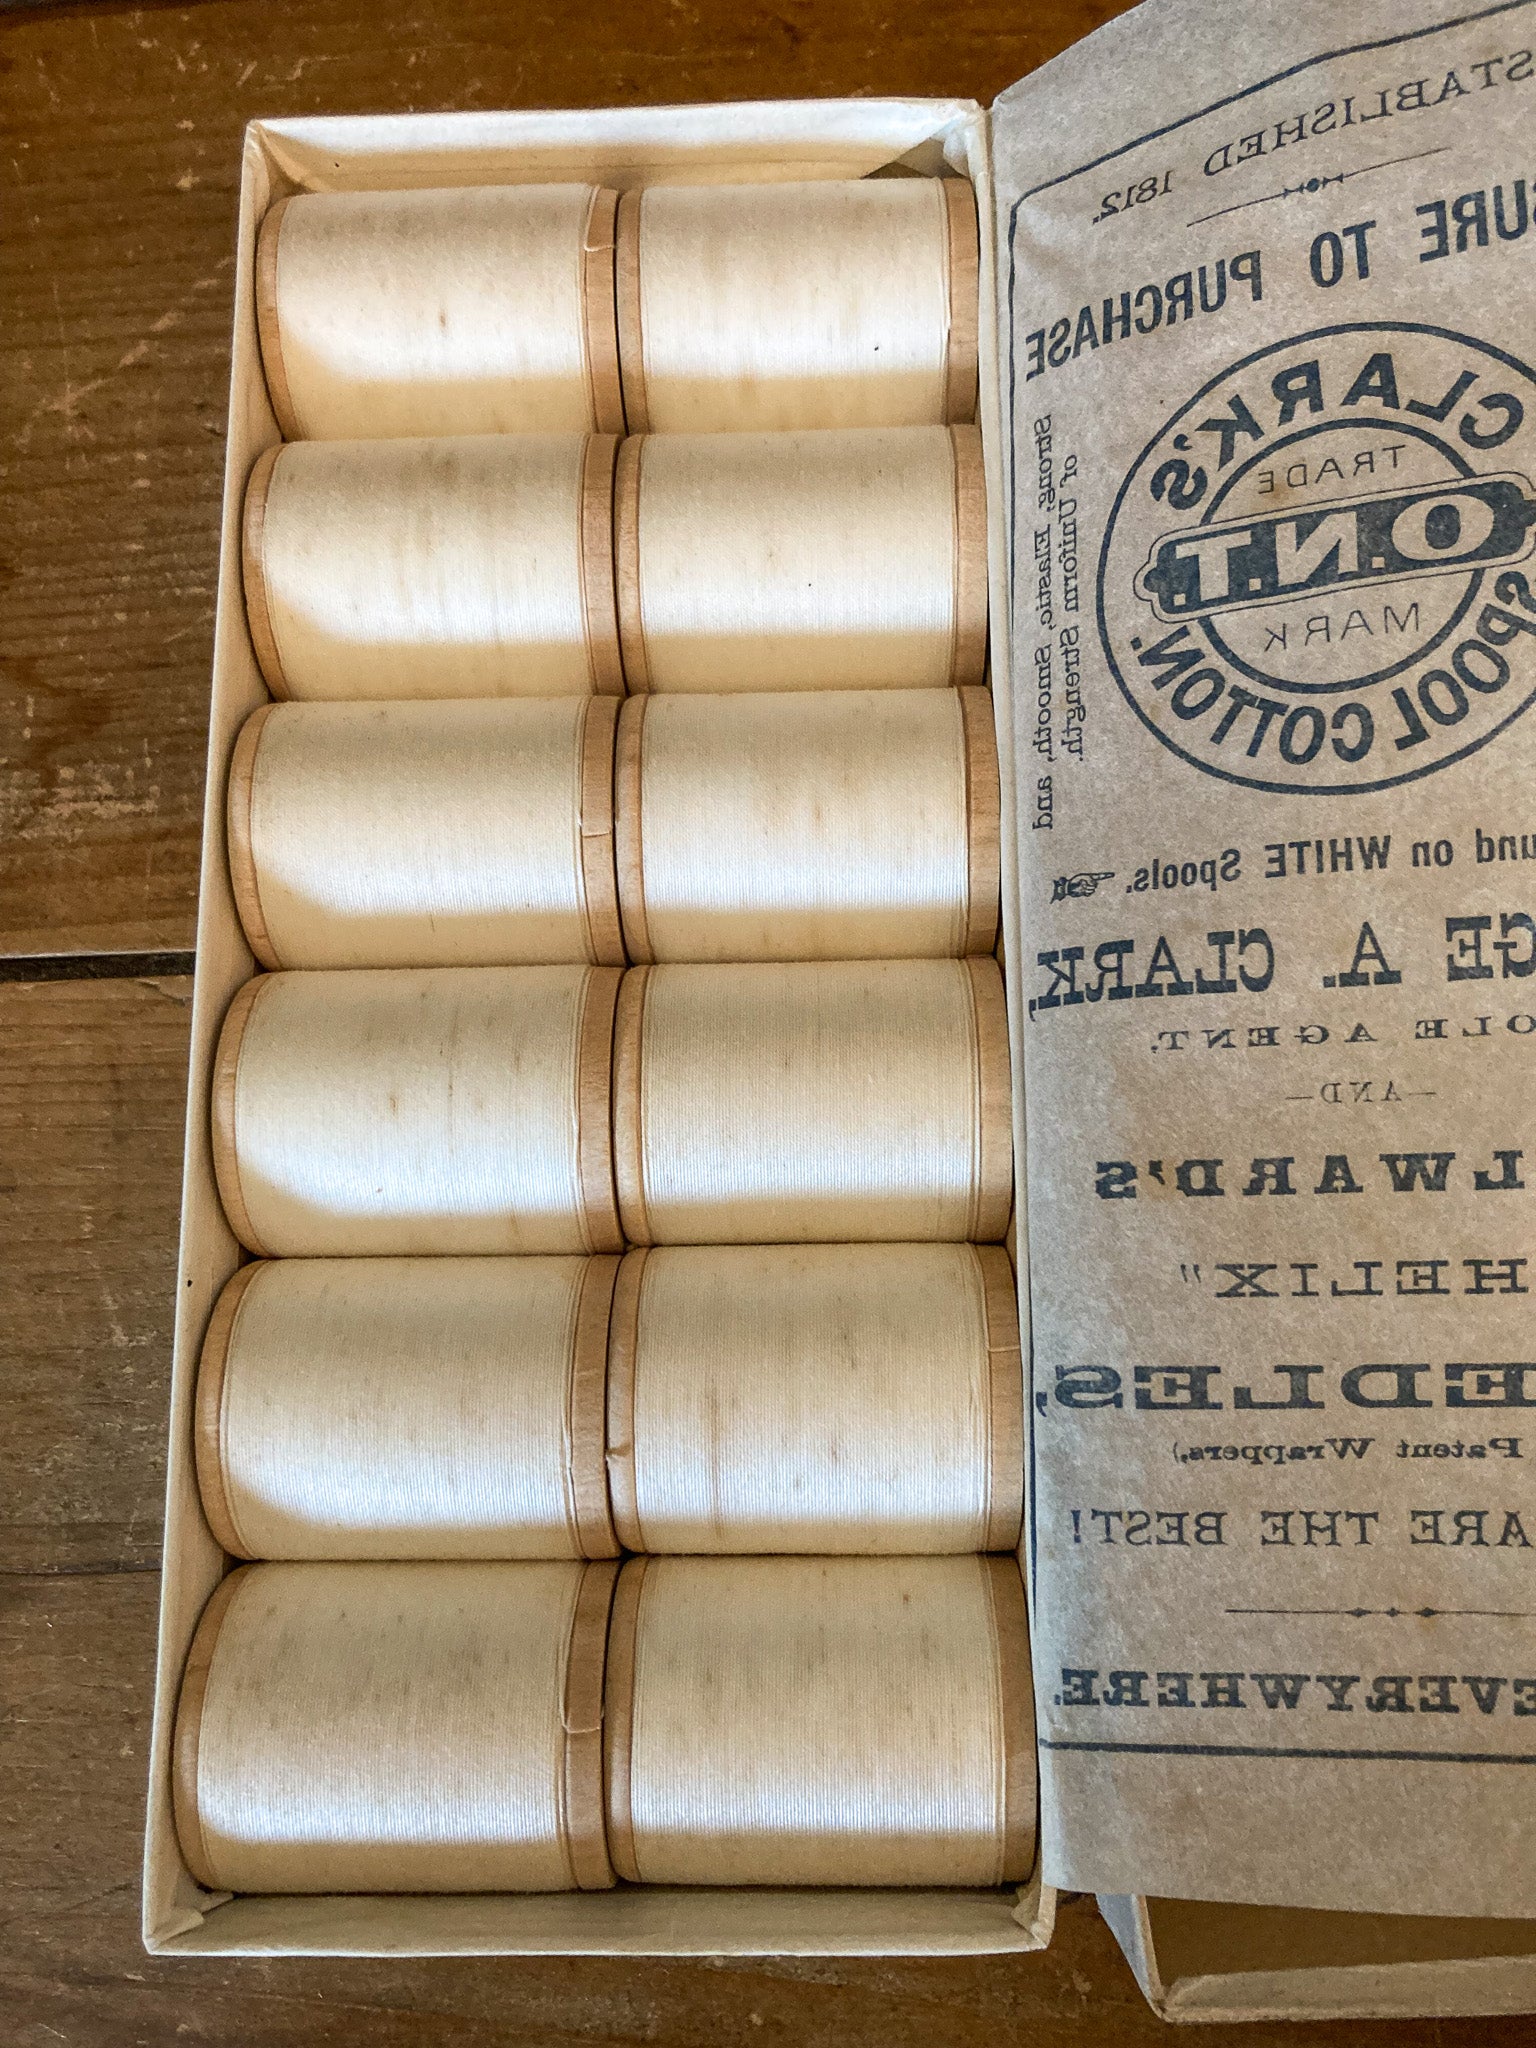 Clark’s O.N.T. White Thread, New Old Stock in Original Box – Large Spools, Large Box!